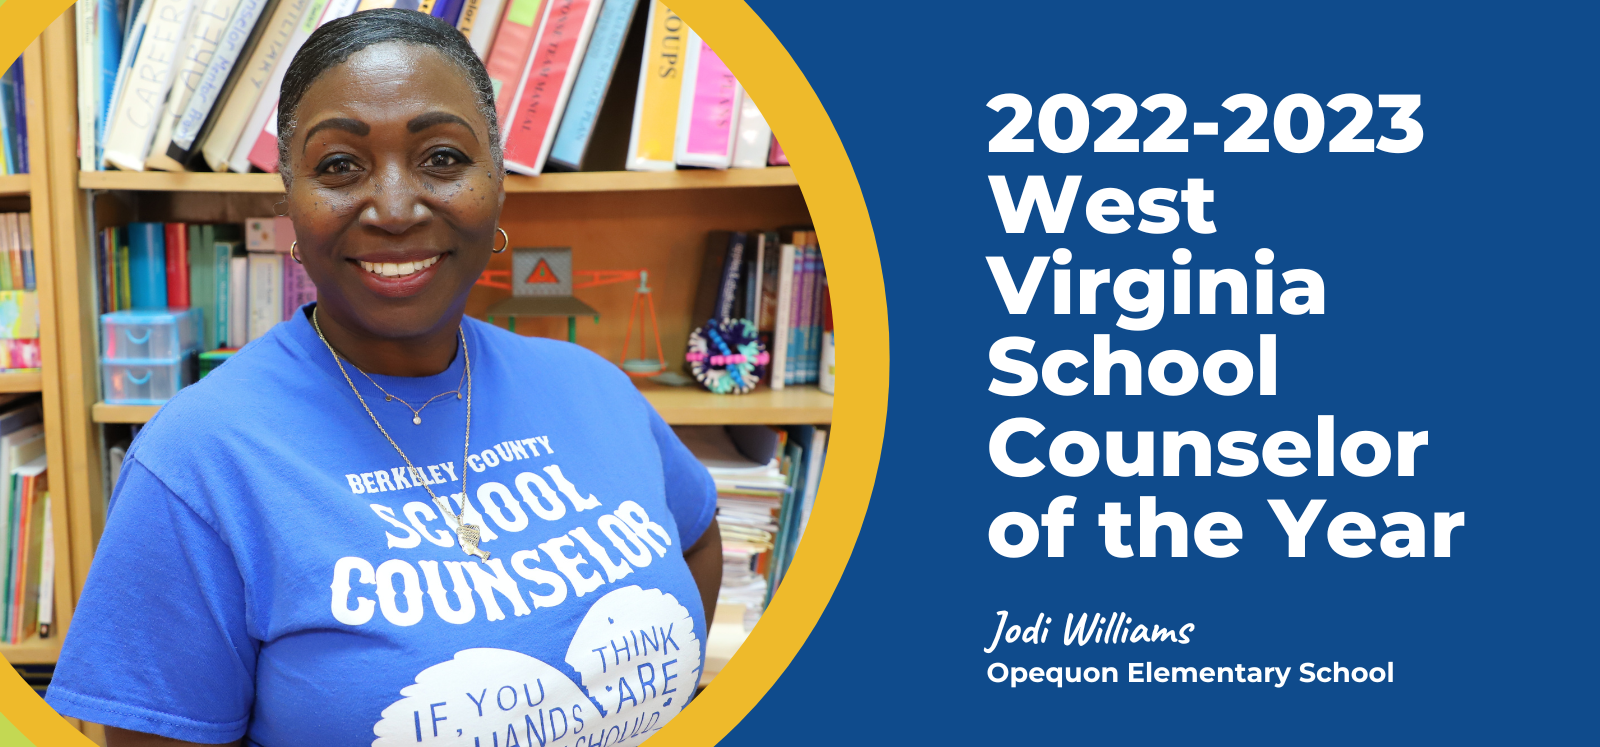 image of west virginia school counselor of the year jodi williams